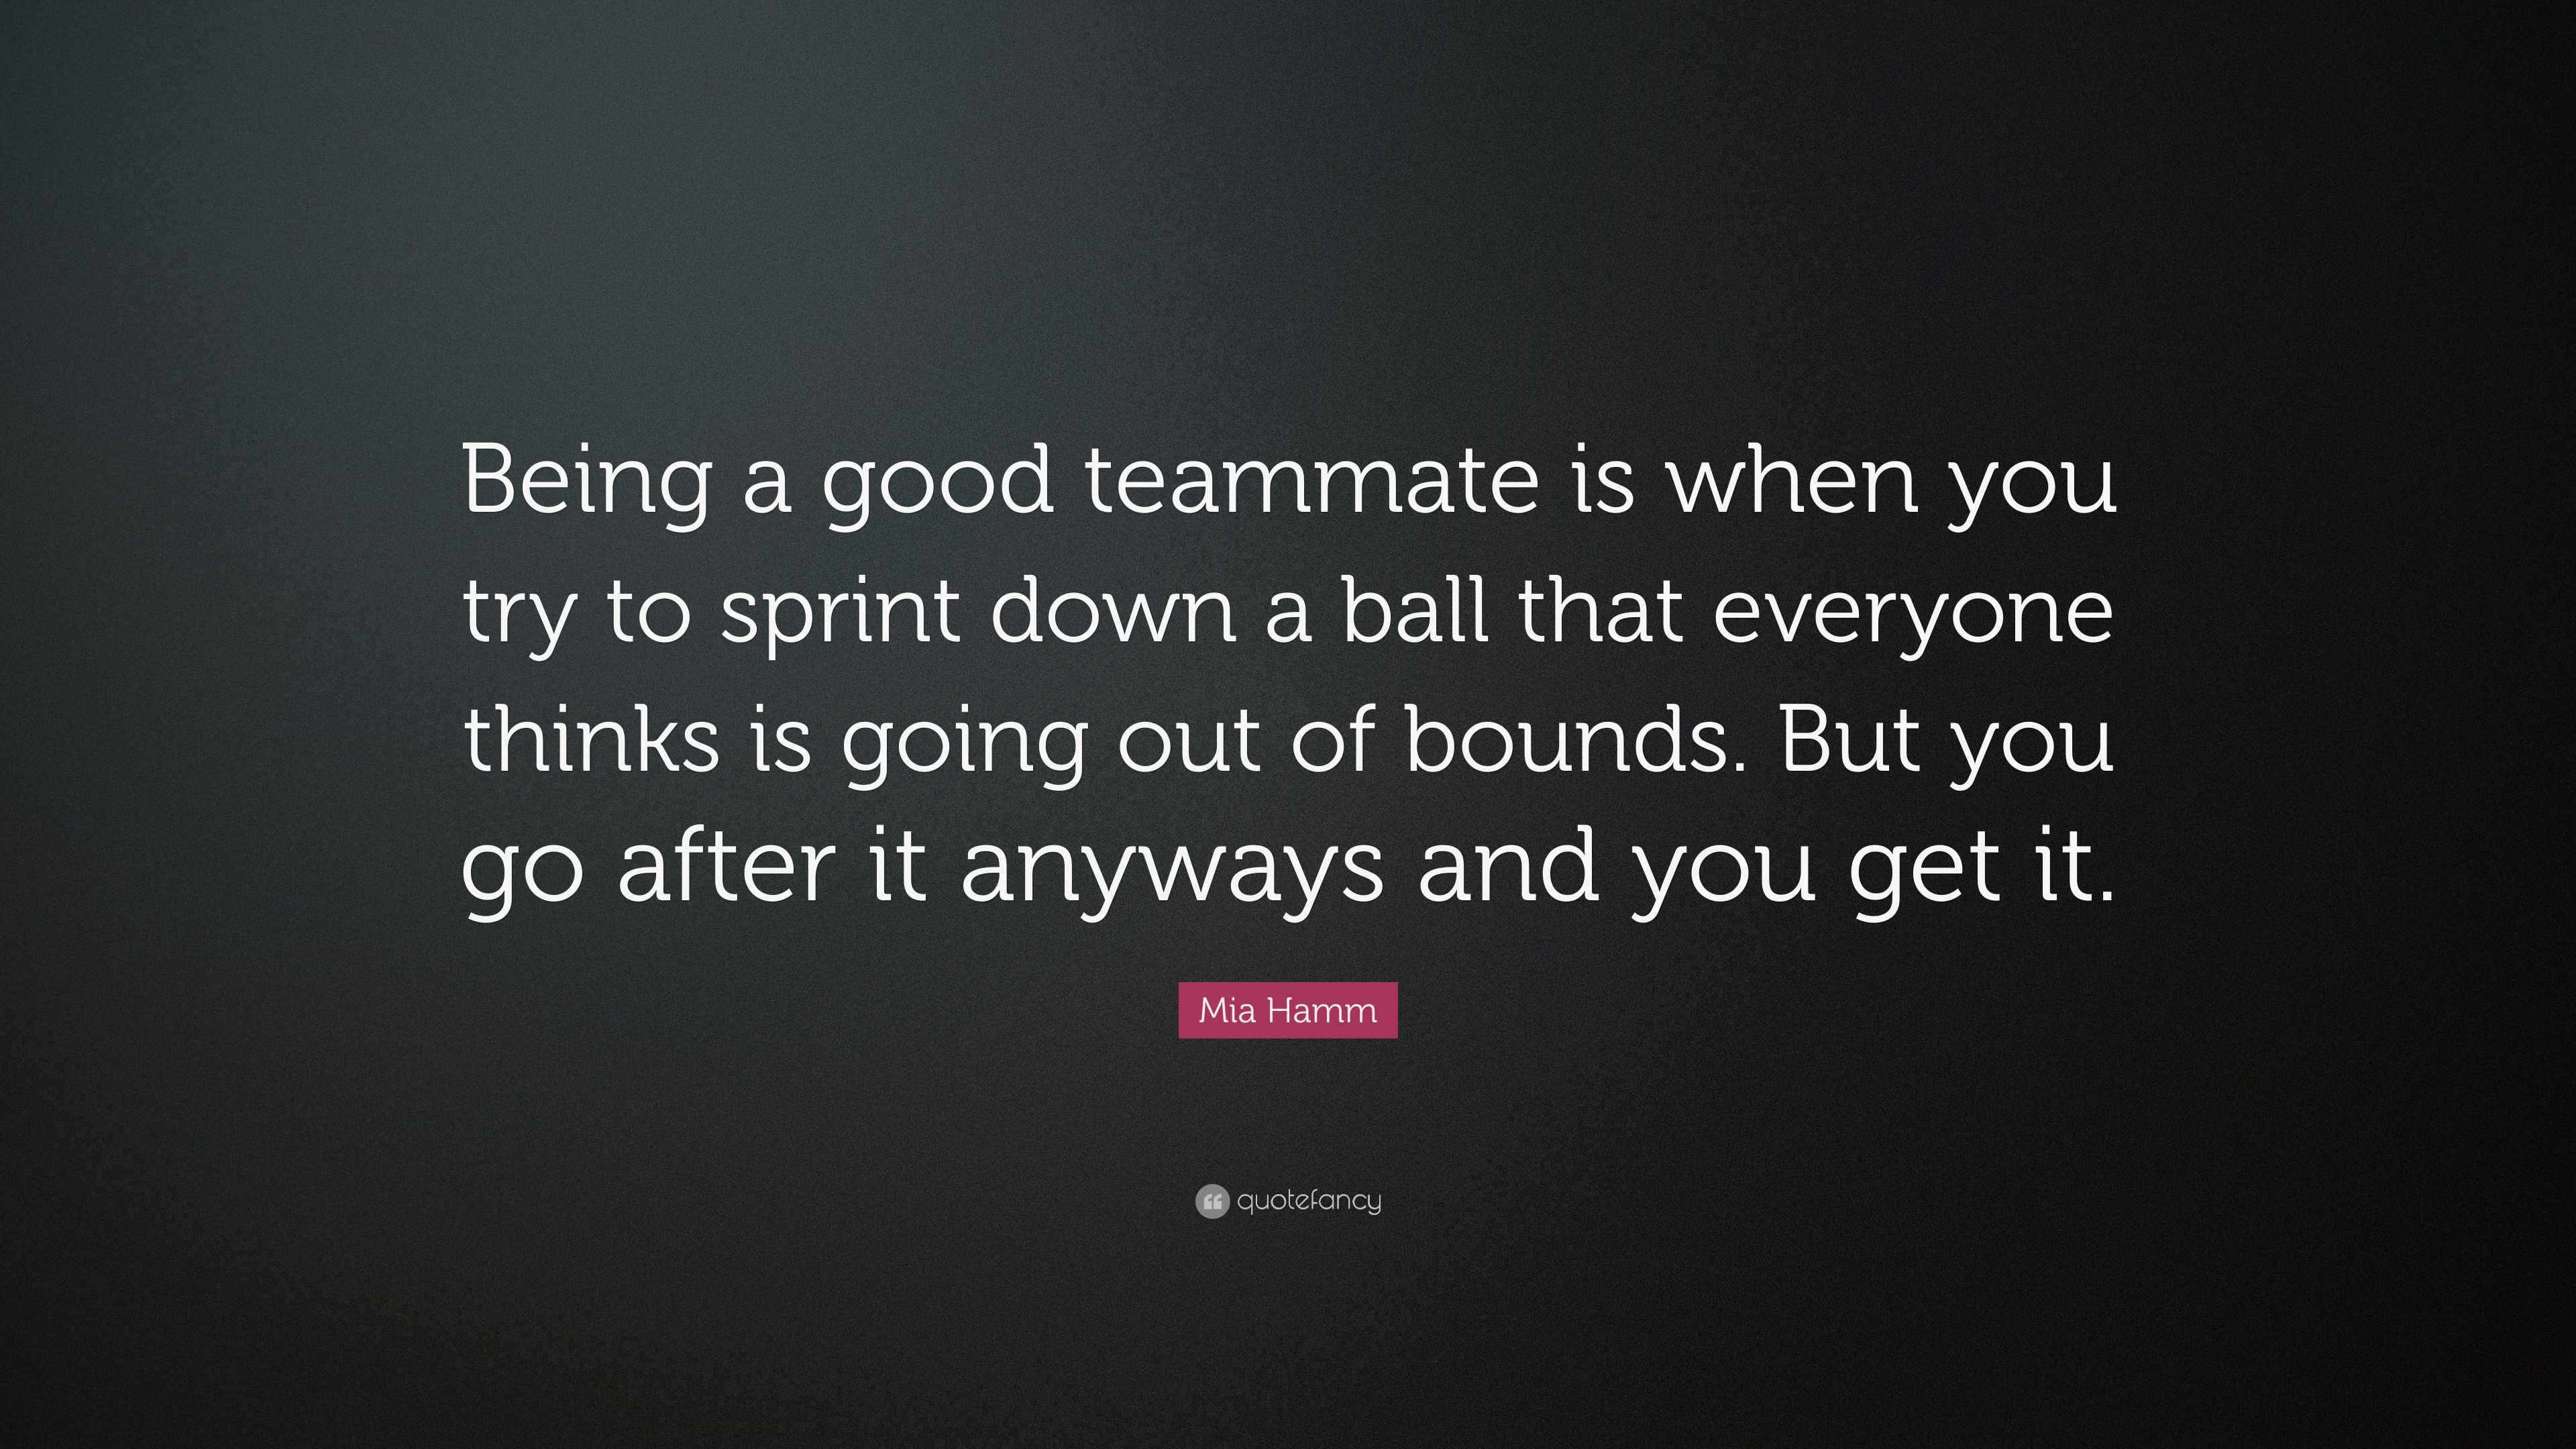 Mia Hamm Quote: “Being a good teammate is when you try to sprint